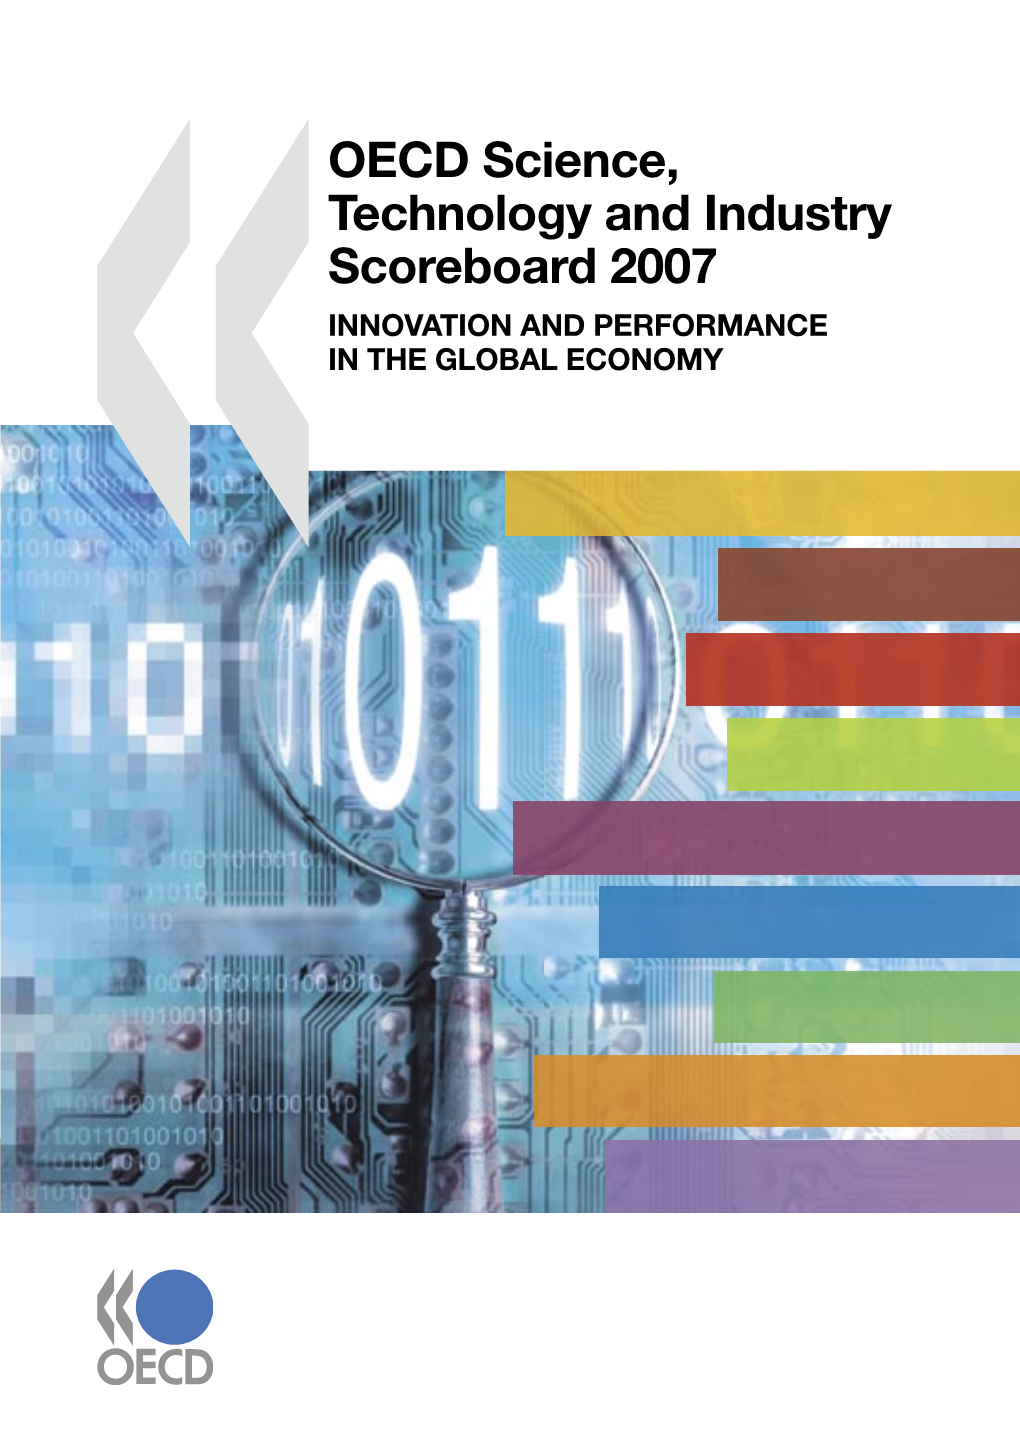 OECD Science, Technology and Industry